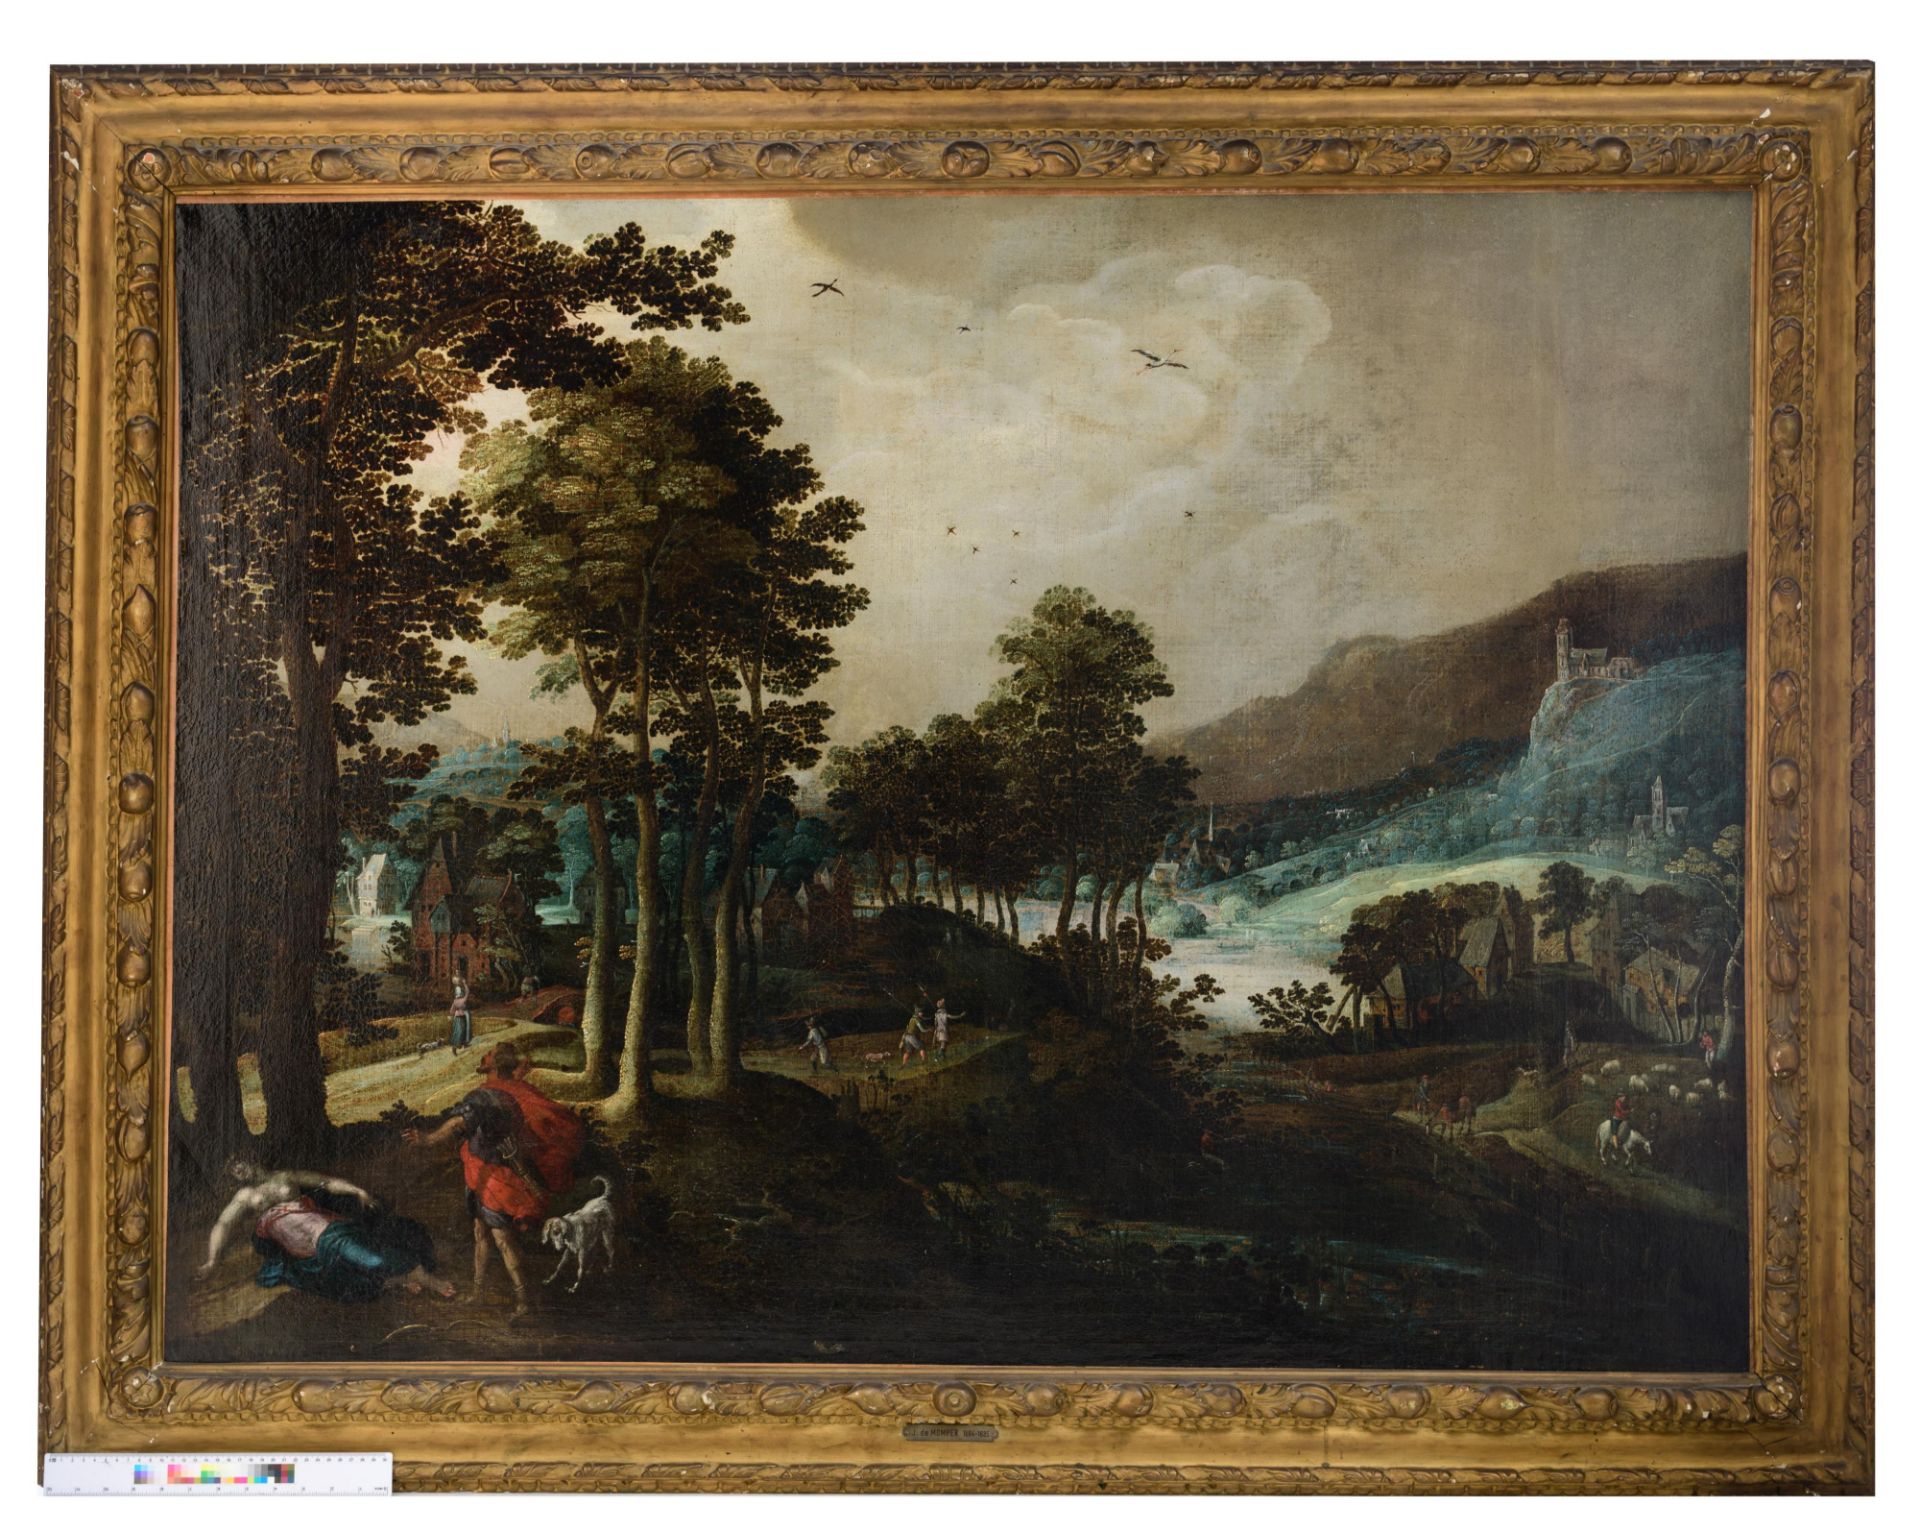 No visible signature, Cephalus and Procris in a landscape, the Southern Netherlands, late 16thC - ea - Image 11 of 11